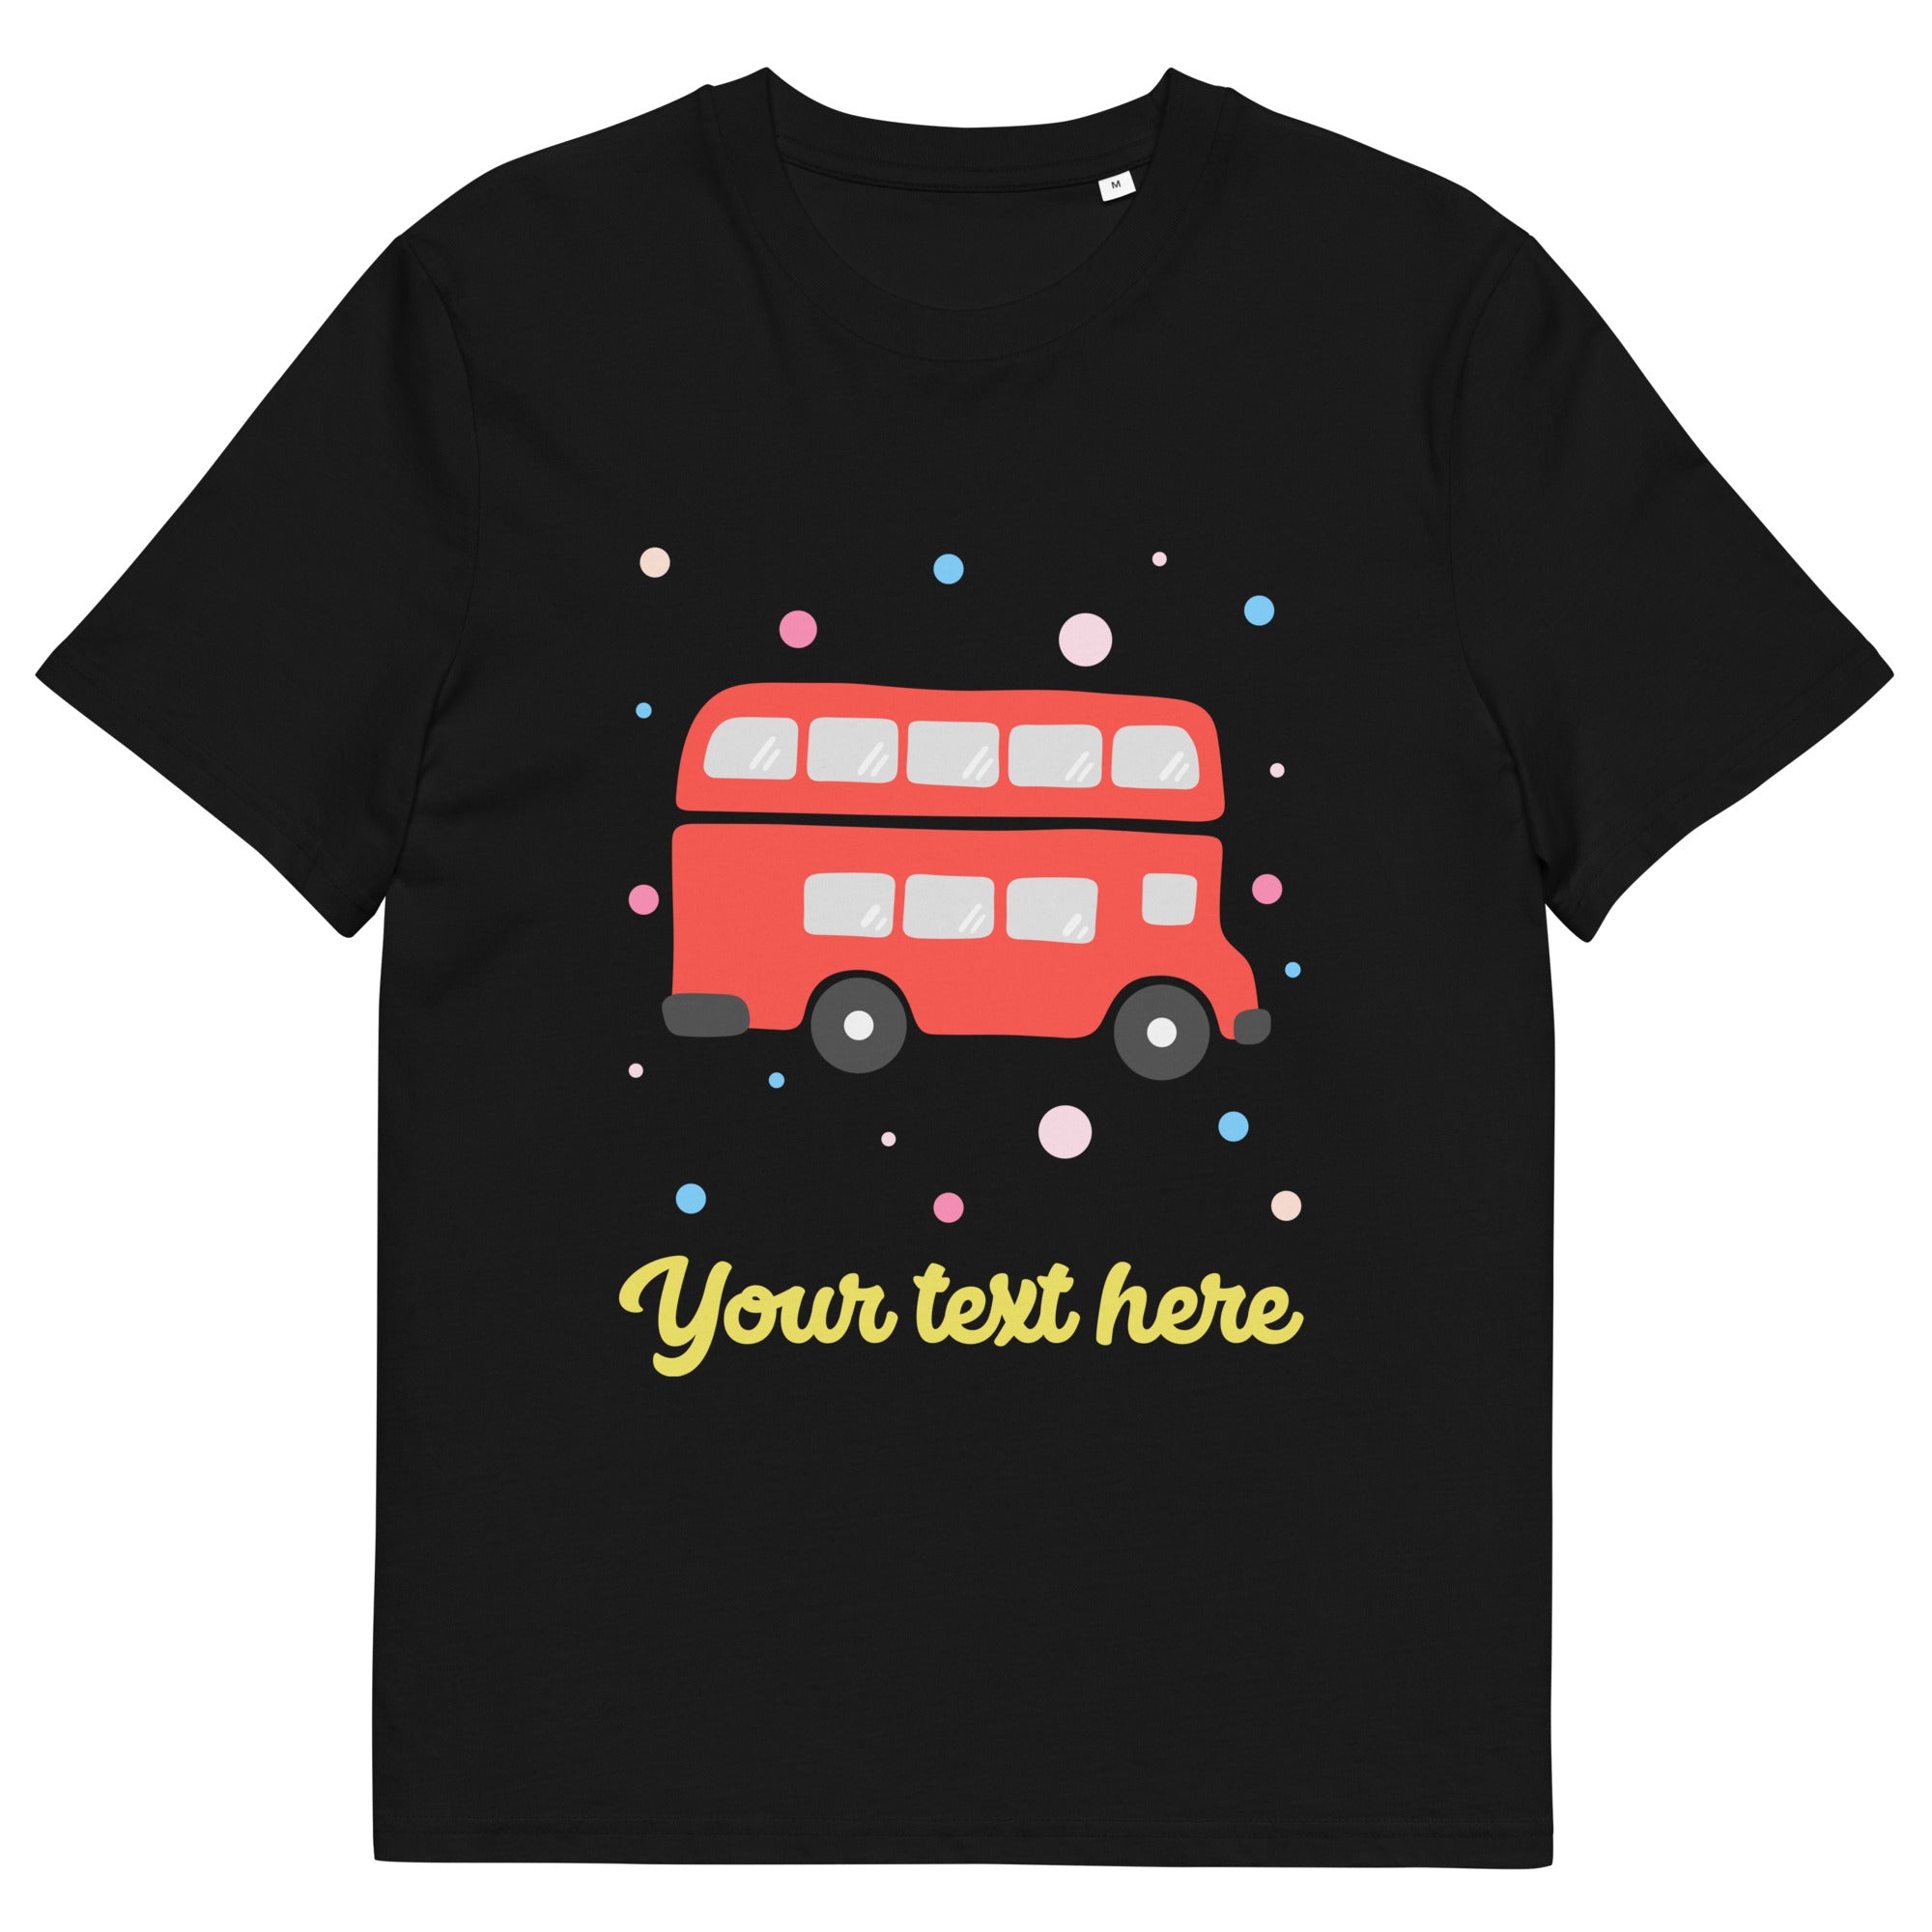 Personalised Custom Text - Organic Cotton Adults Unisex T-Shirt - London Doodles - Red Bus - Black